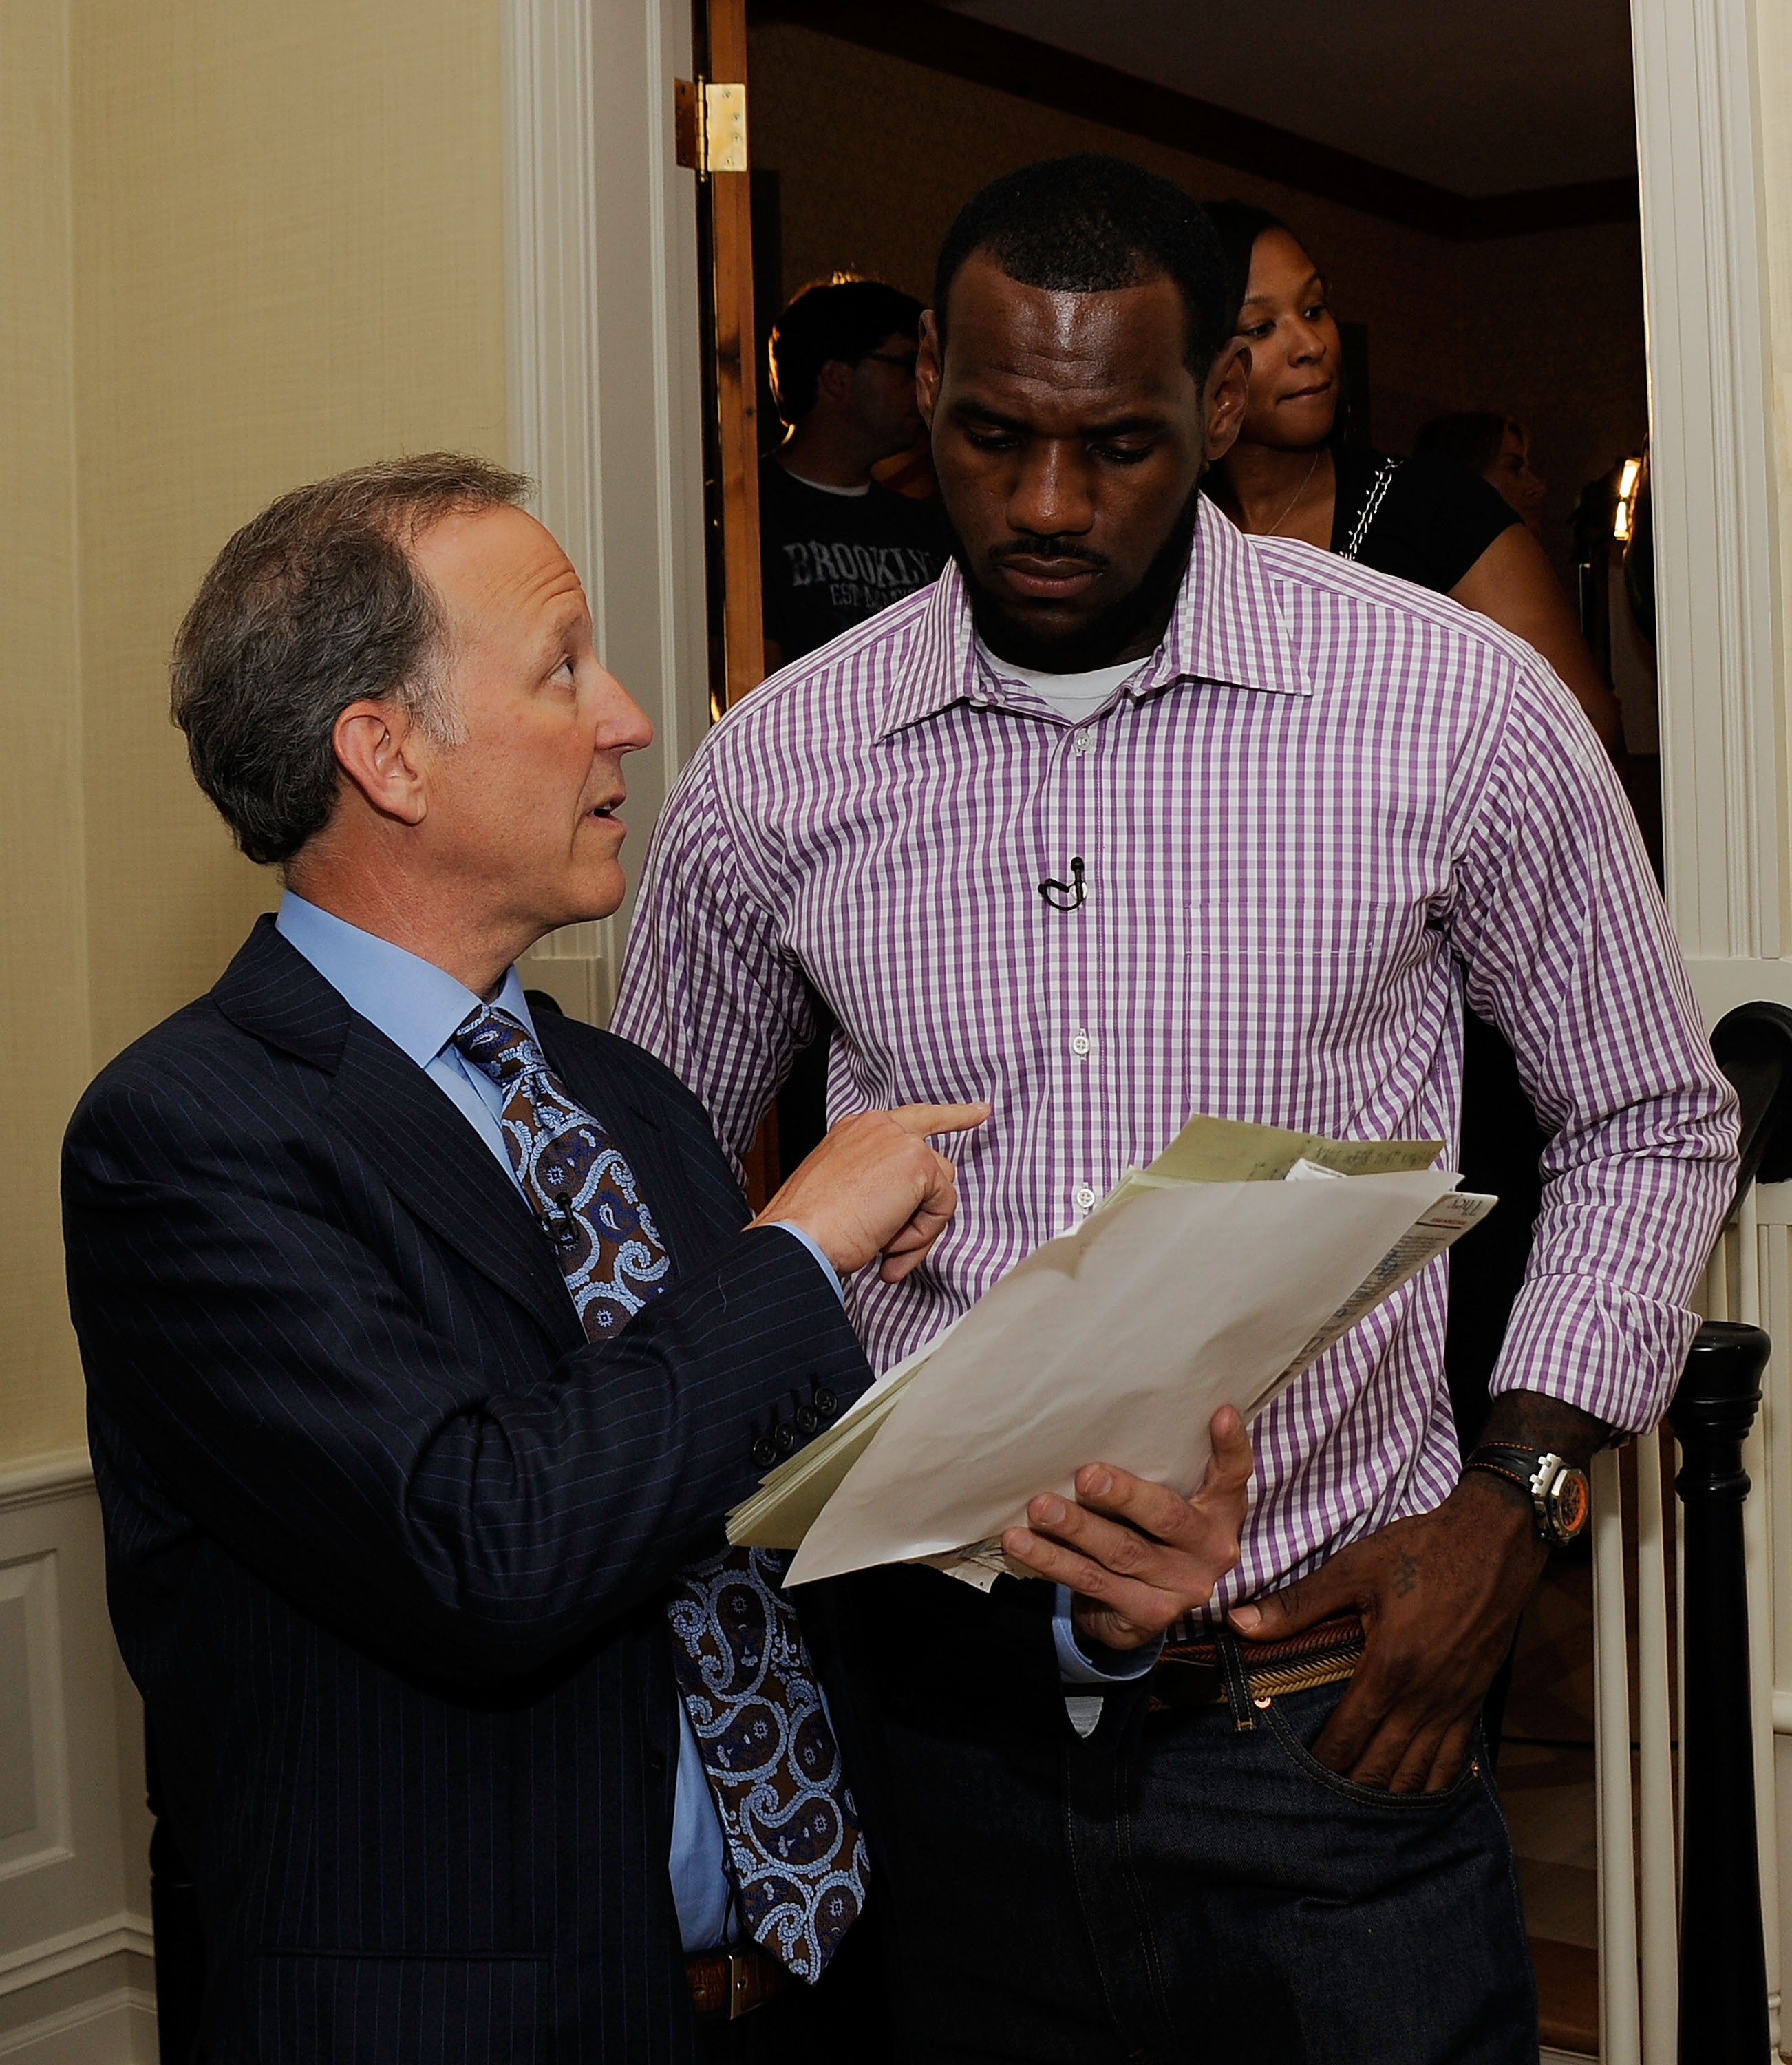 GREENWICH, CT - JULY 08:  (EXCLUSIVE COVERAGE)  Jim Gray of ESPN speaks with LeBron James at attends the LeBron James Pre Decision Meet and Greet on July 8, 2010 in Greenwich, Connecticut. Proceeds from tonight's 2.5 million dollar event will be donated t